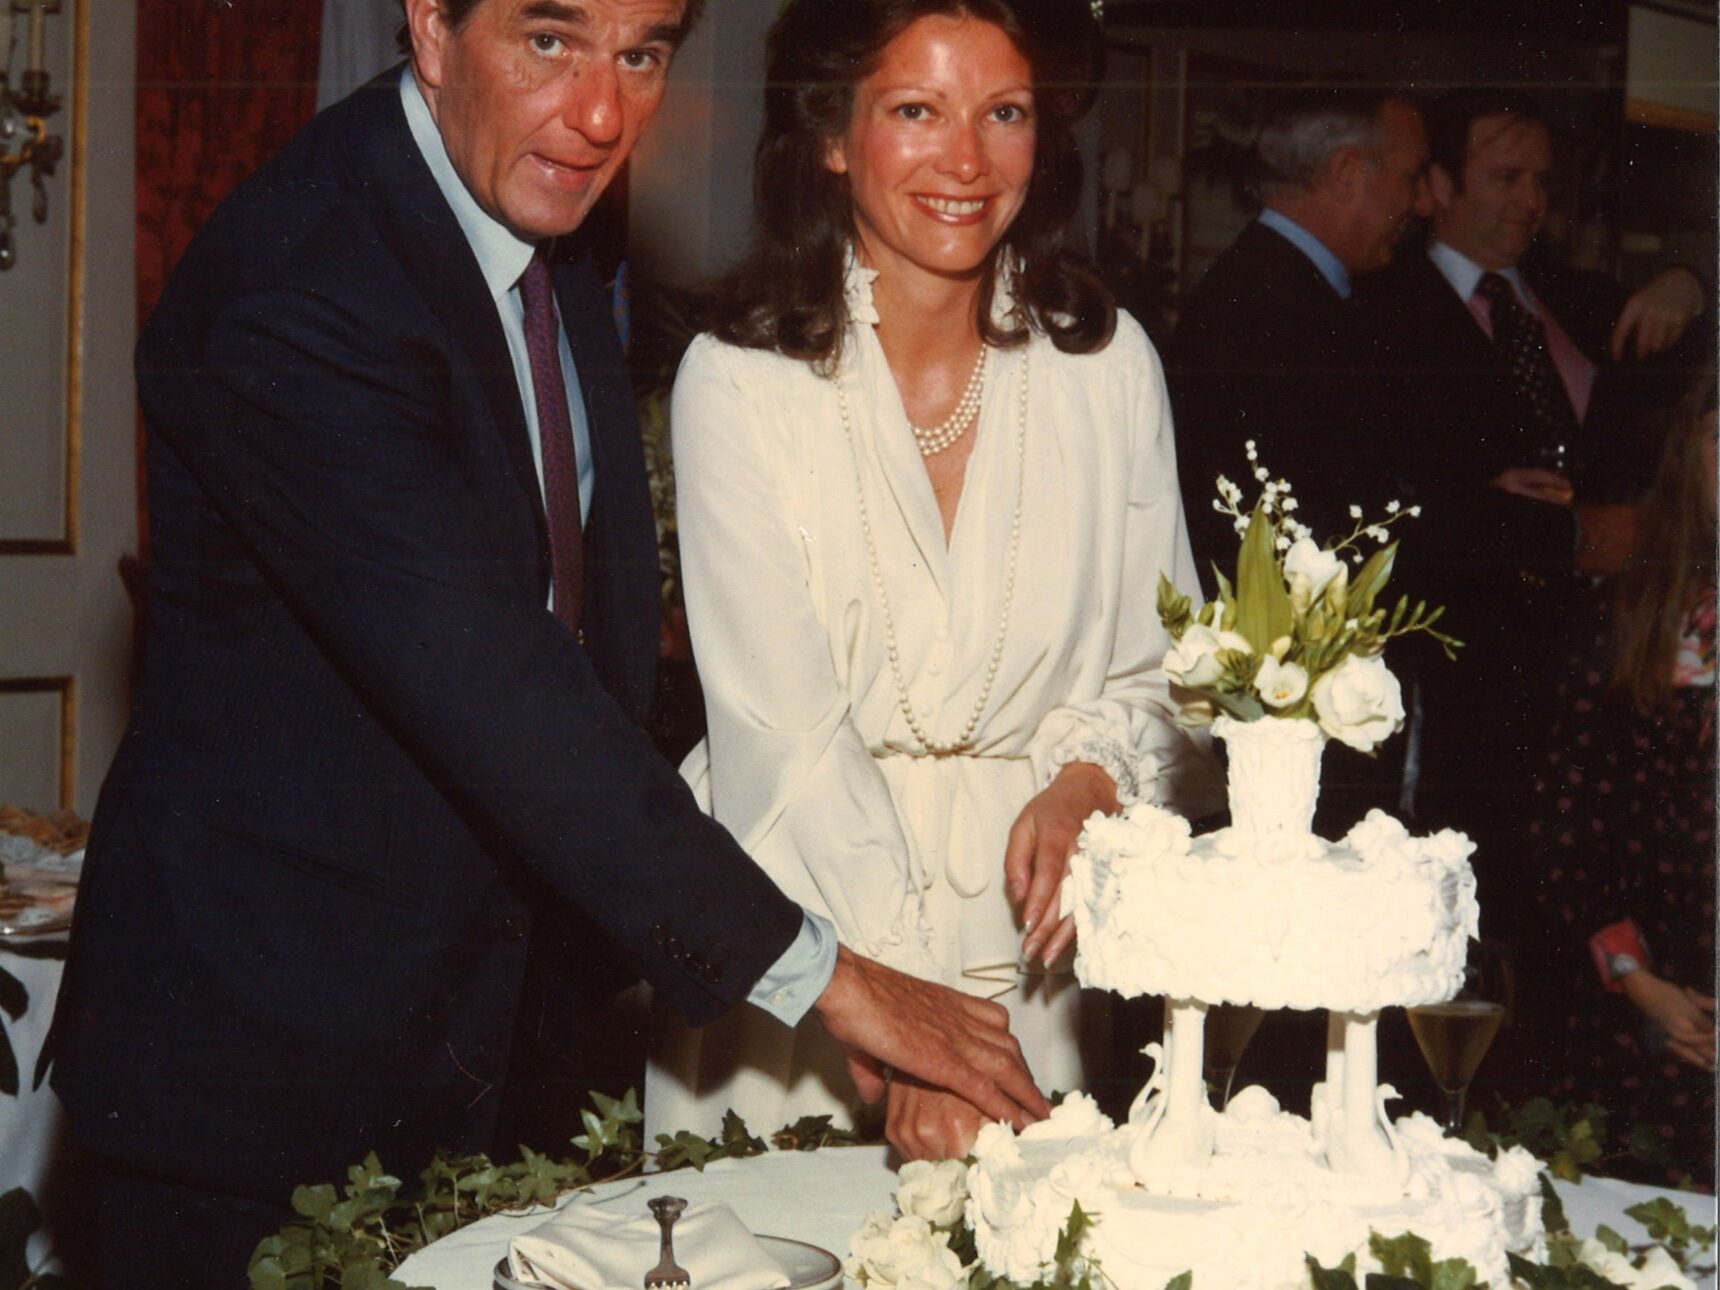 Following the tragic and untimely death of Mark Brocklehurst, Elizabeth marries Henry Cubitt, 4th Baron Ashcombe in 1979